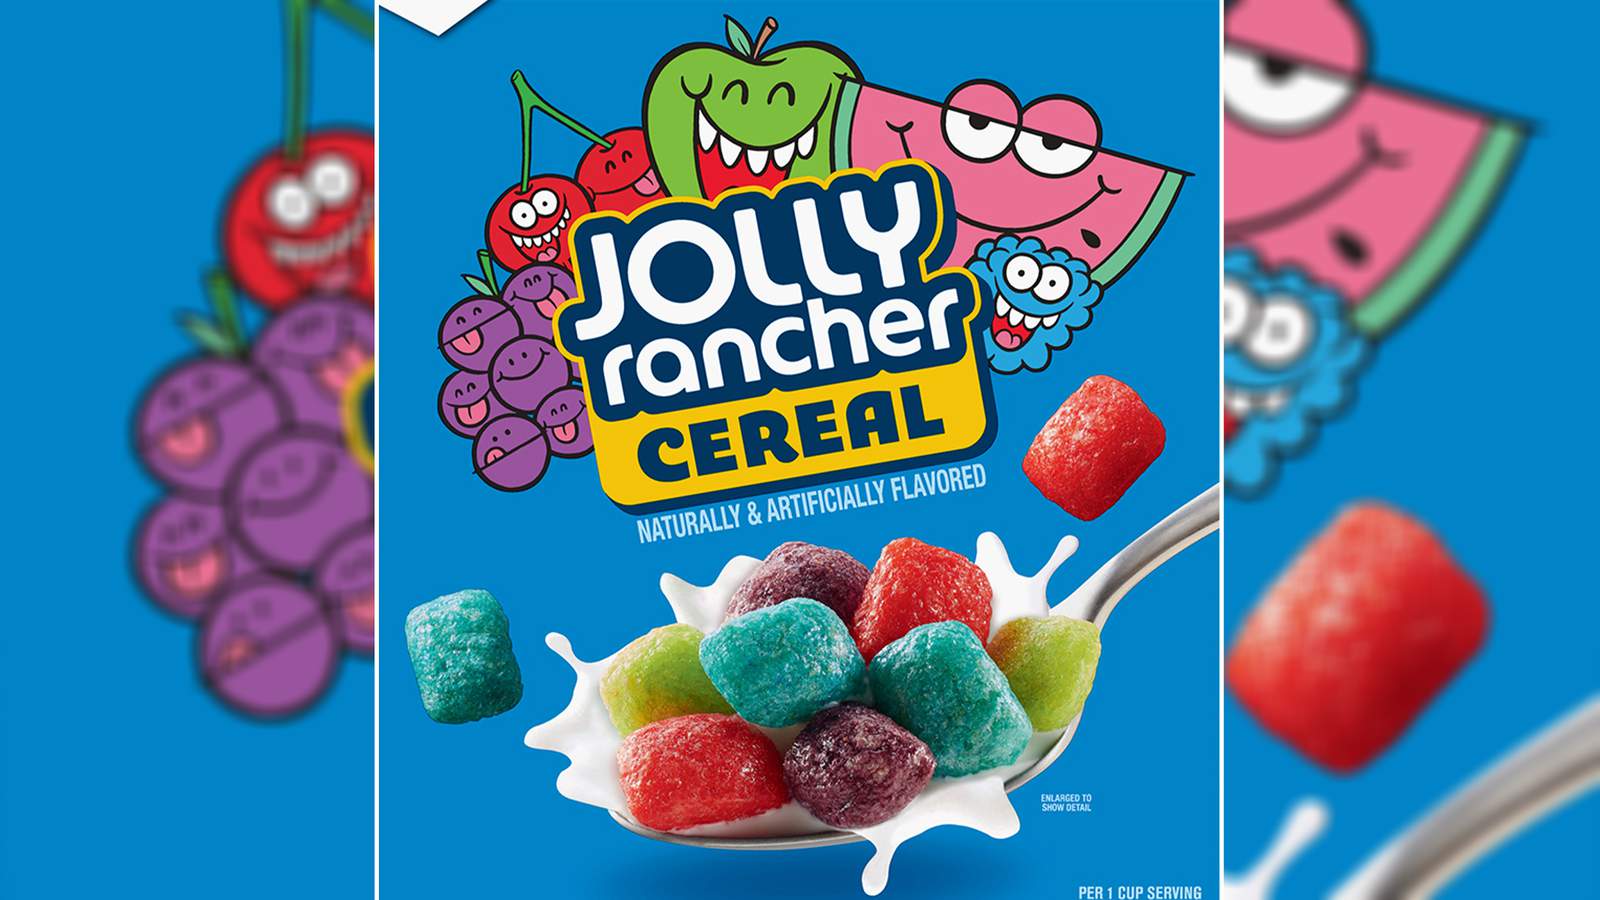 Fruity candy lovers can now buy Jolly Rancher cereal